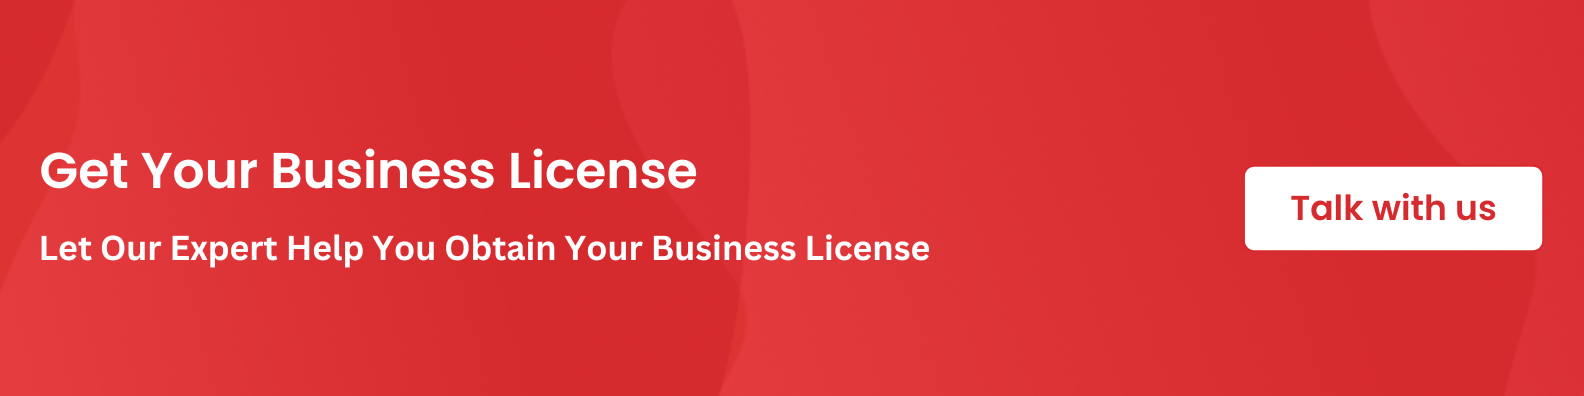 DED License in the UAE: